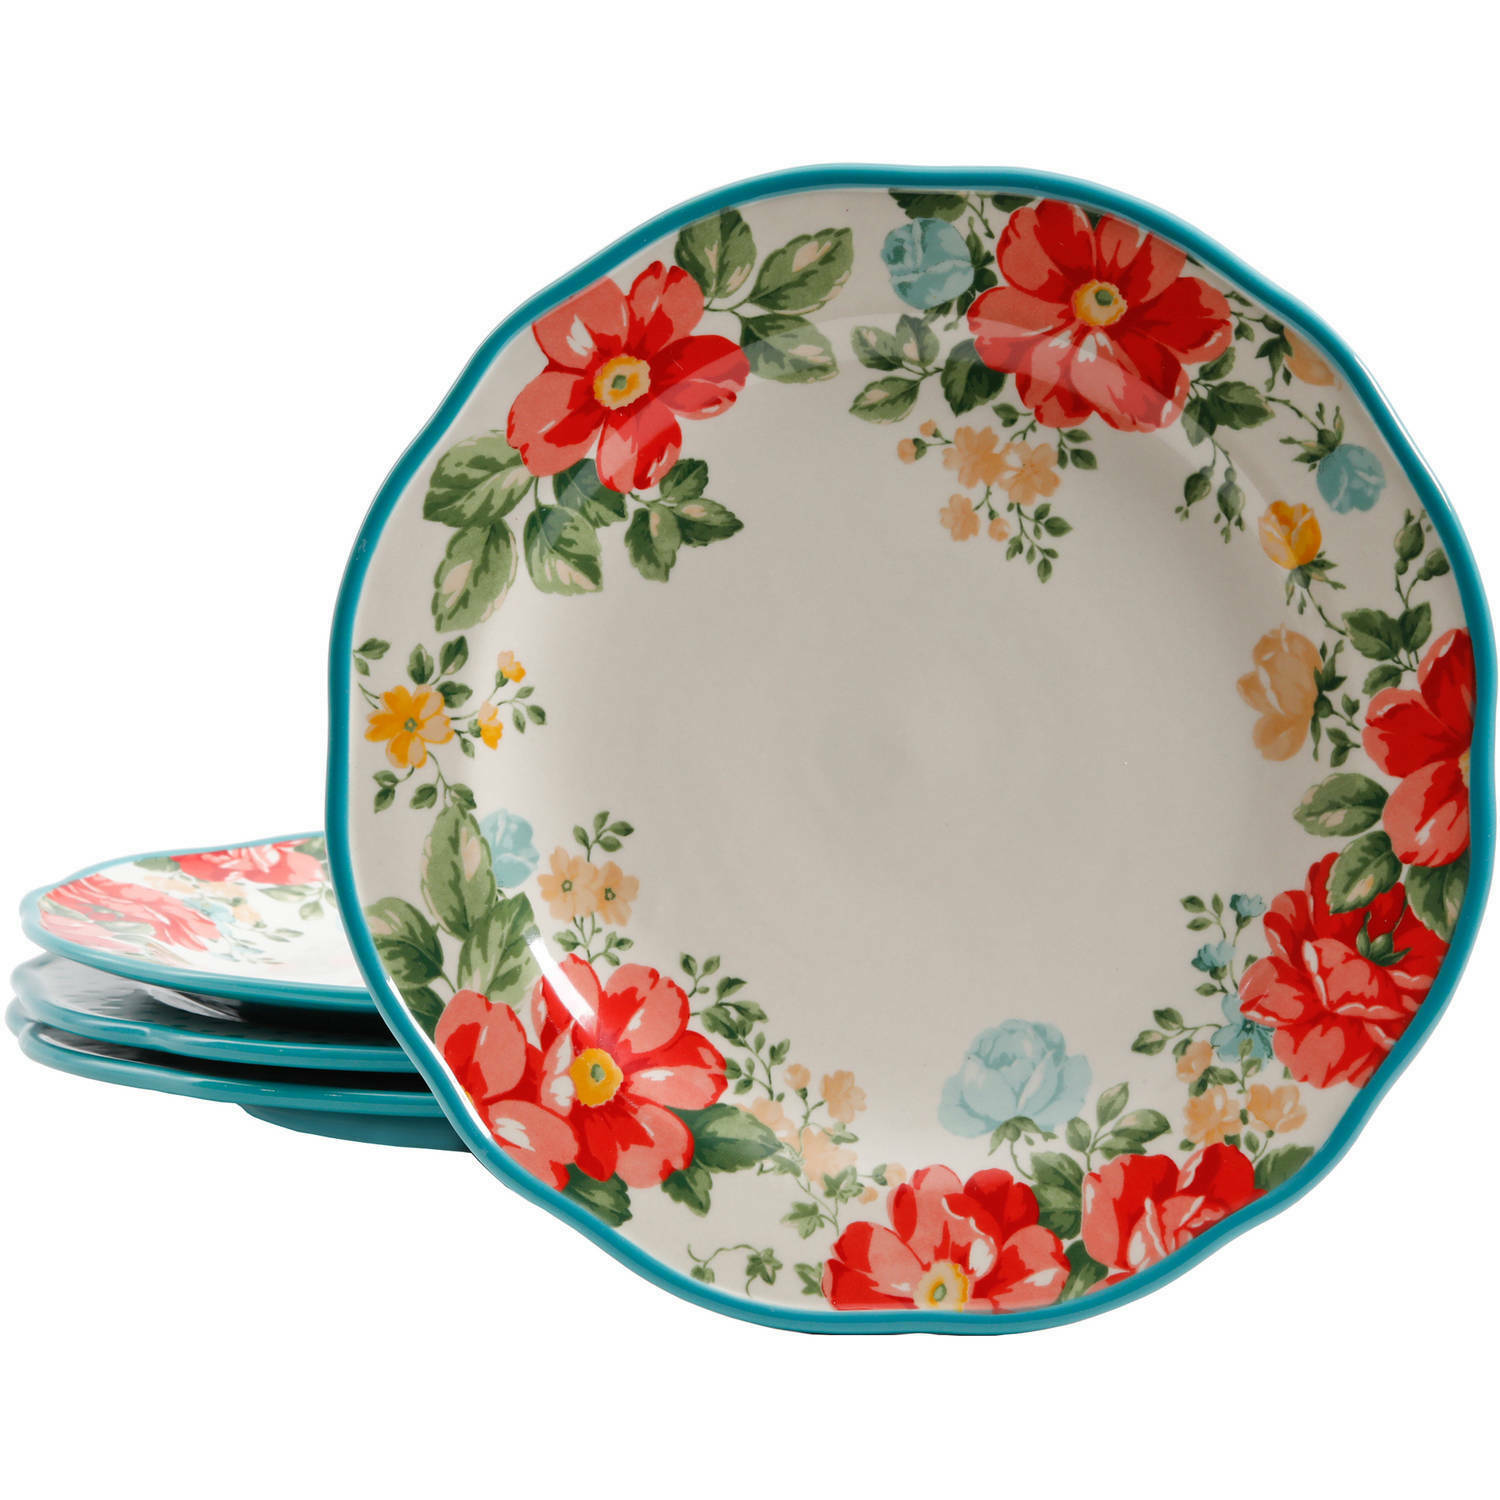 The Pioneer Woman Country Vintage Retro Floral Stoneware Dinner Plate, Set of 4